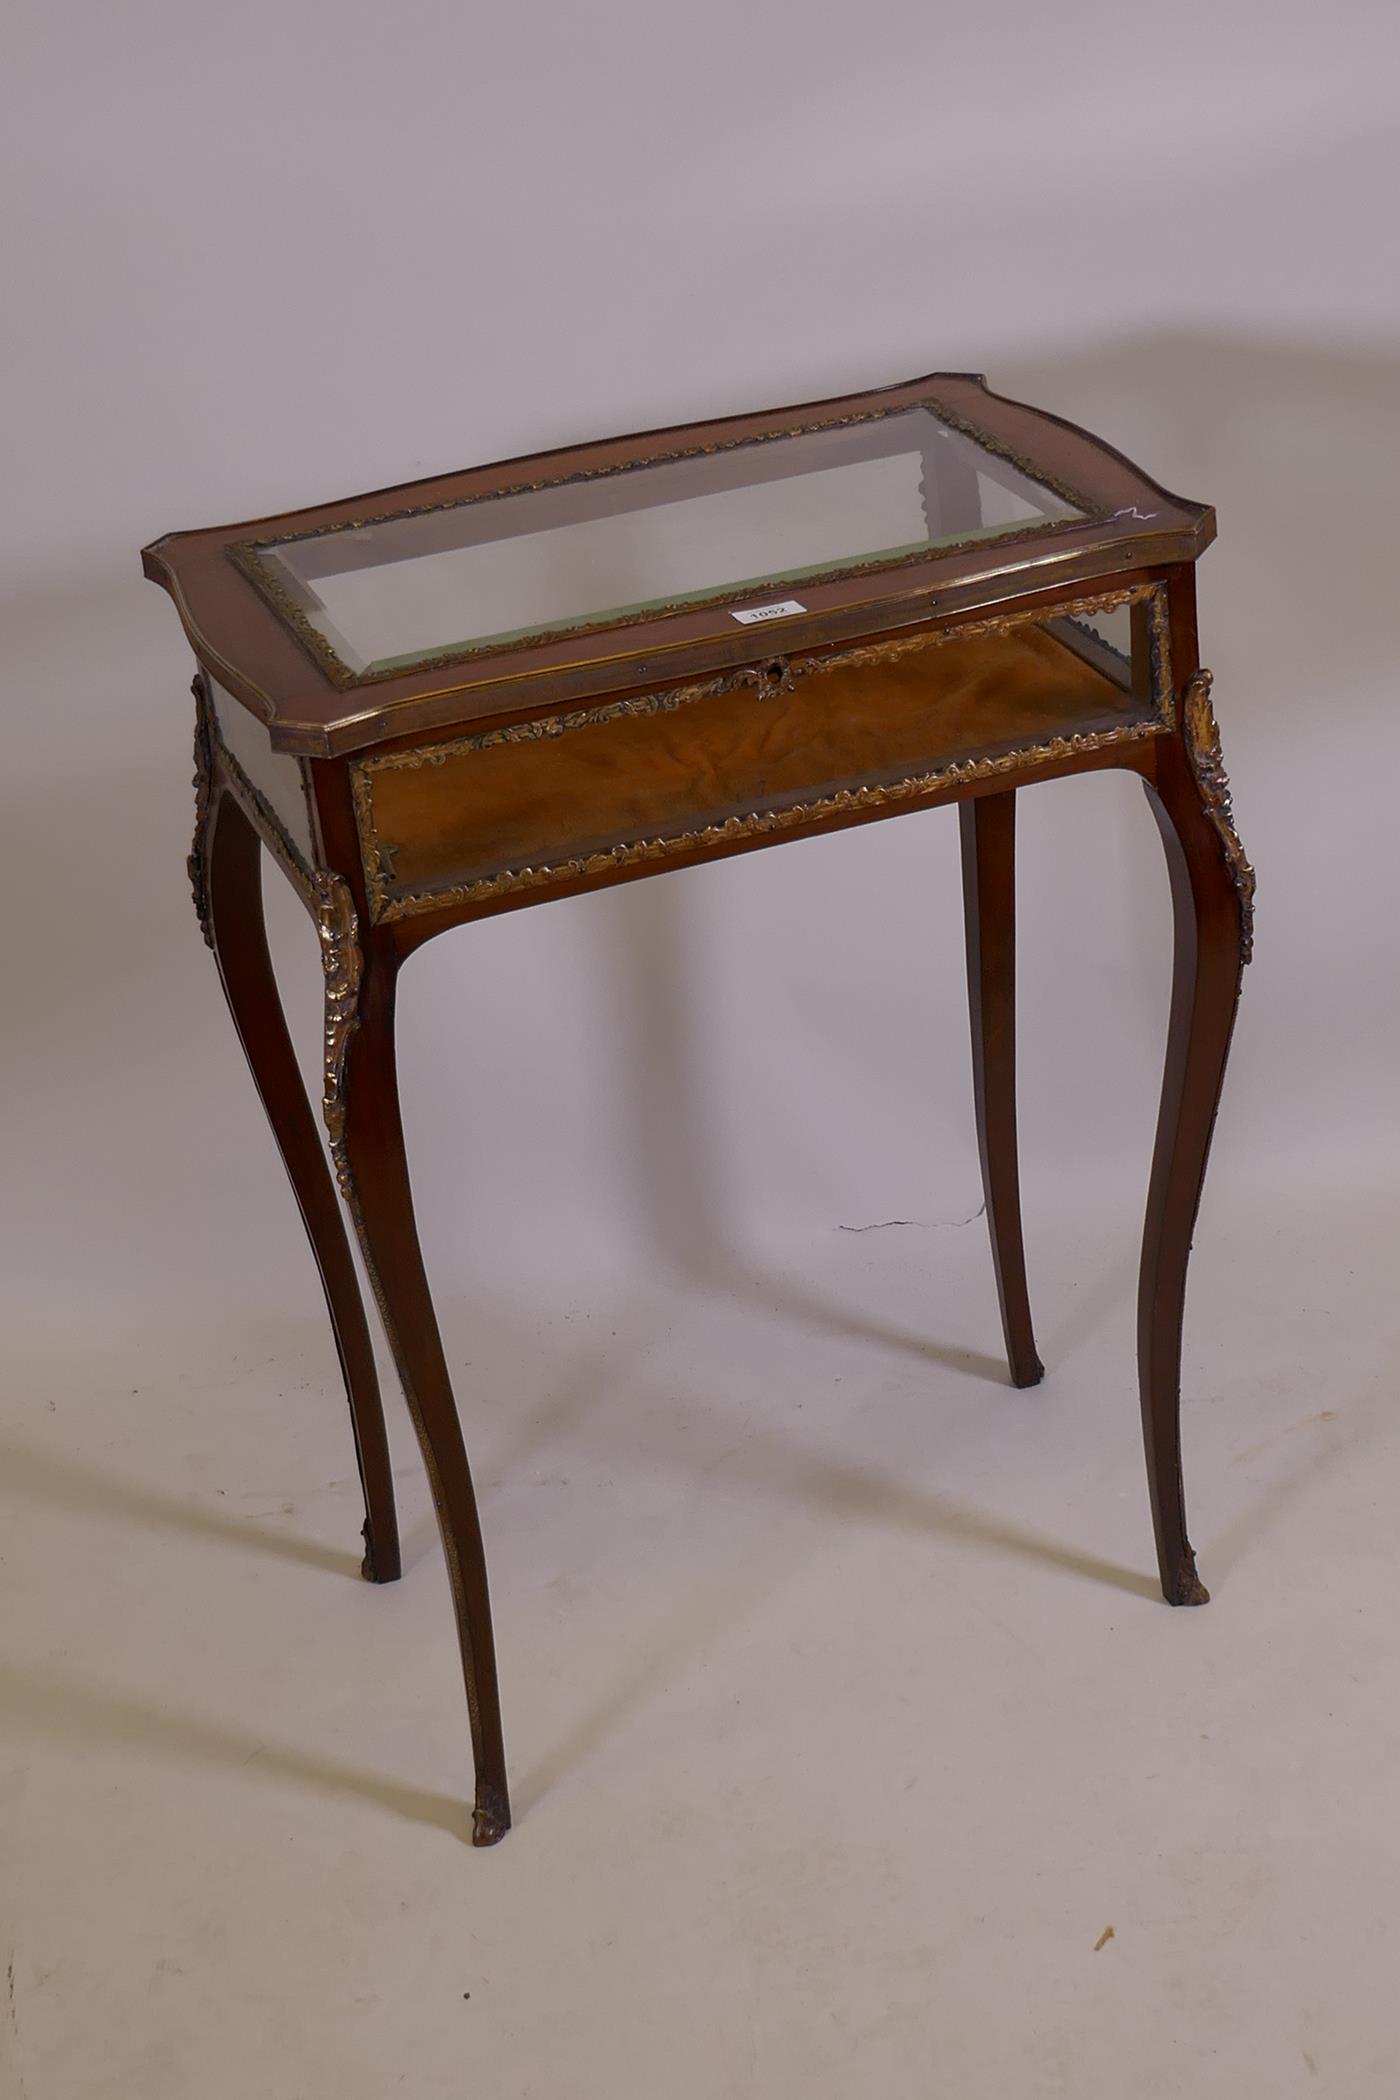 A C19th French mahogany bijouterie cabinet with ormolu mounts, shaped legs and scrolled sabots, 60 x - Image 2 of 5